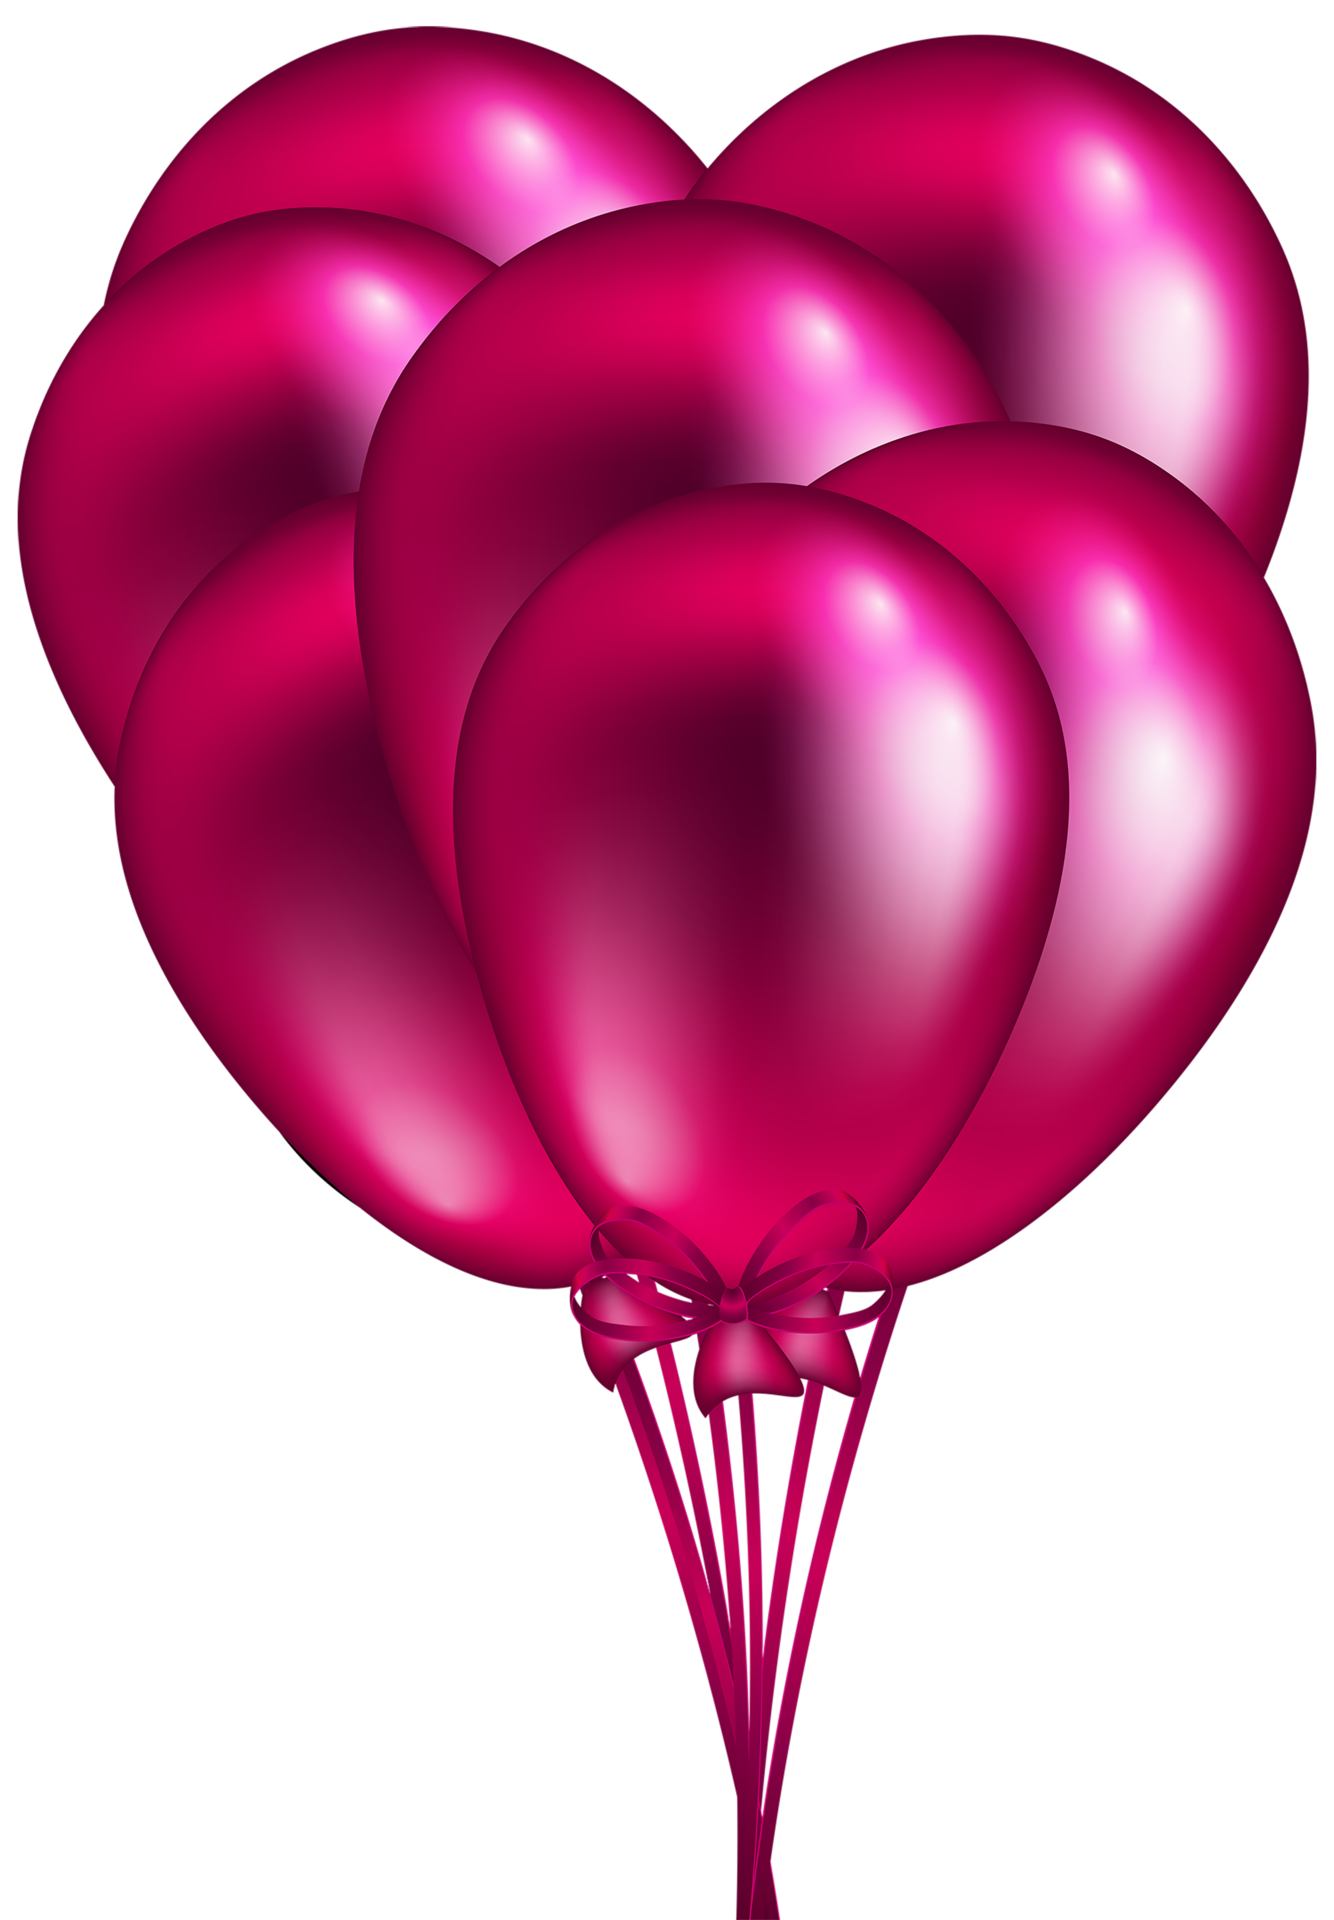 Globo PNG Free Images with Transparent Background - ( Free Downloads)